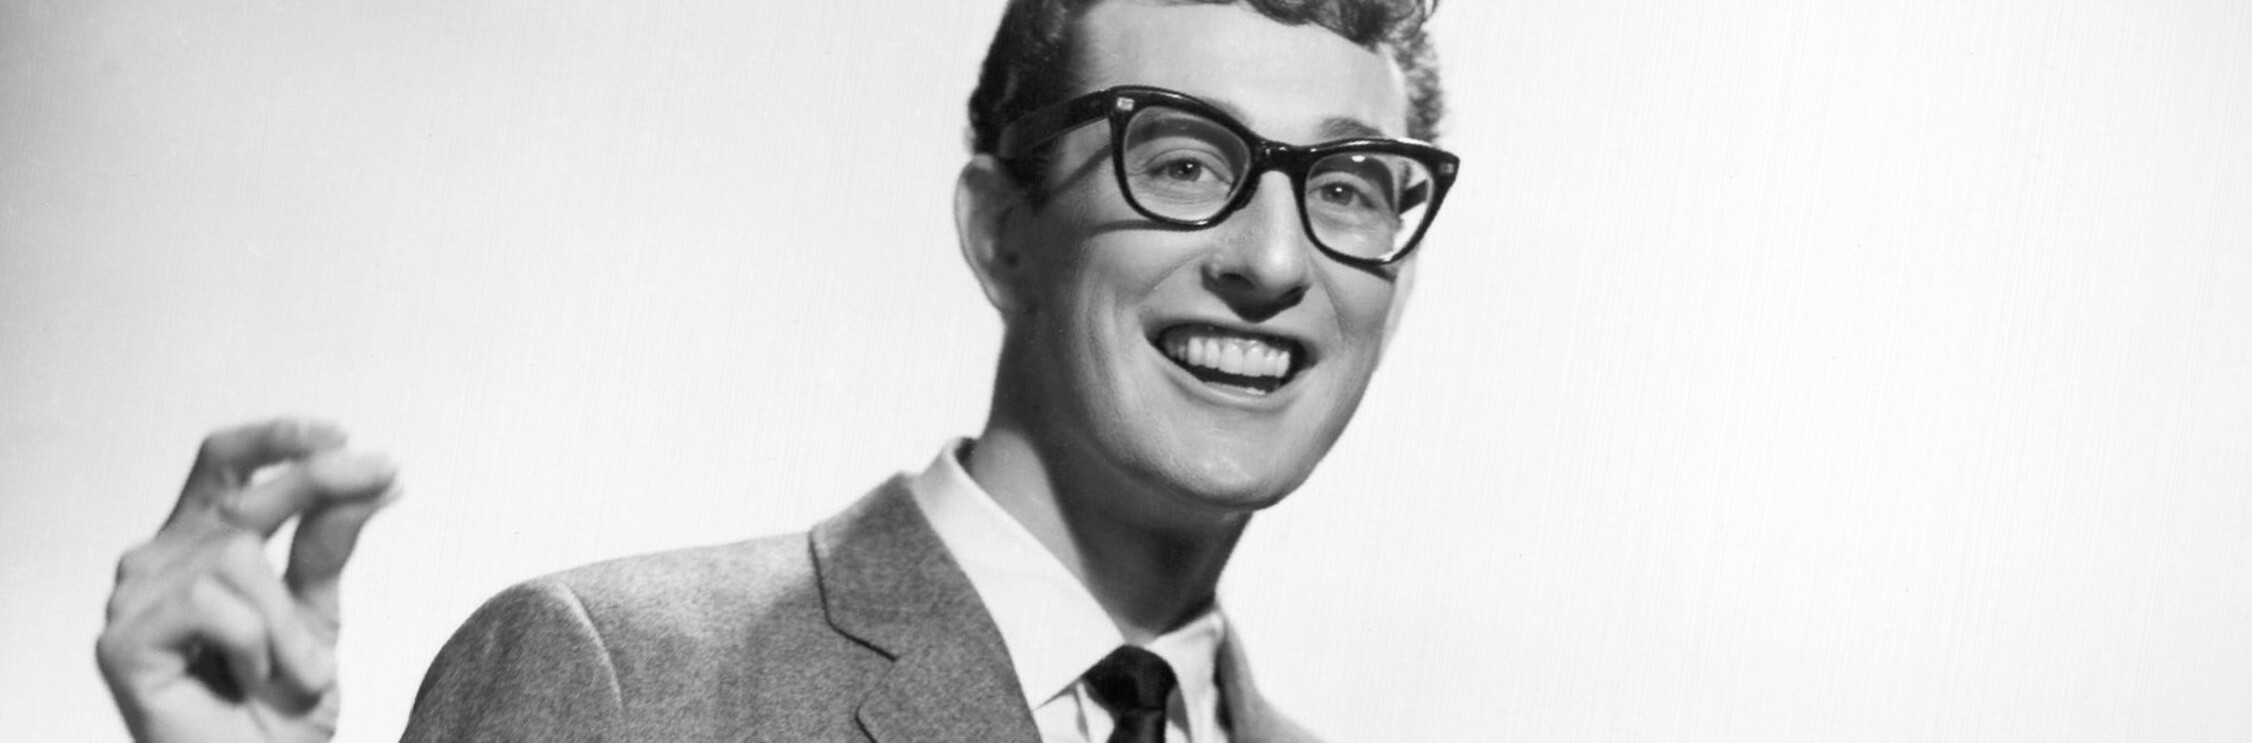 Black and white, head and shoulders photograph of Buddy Holly, wearing black glasses and a shirt and tie.